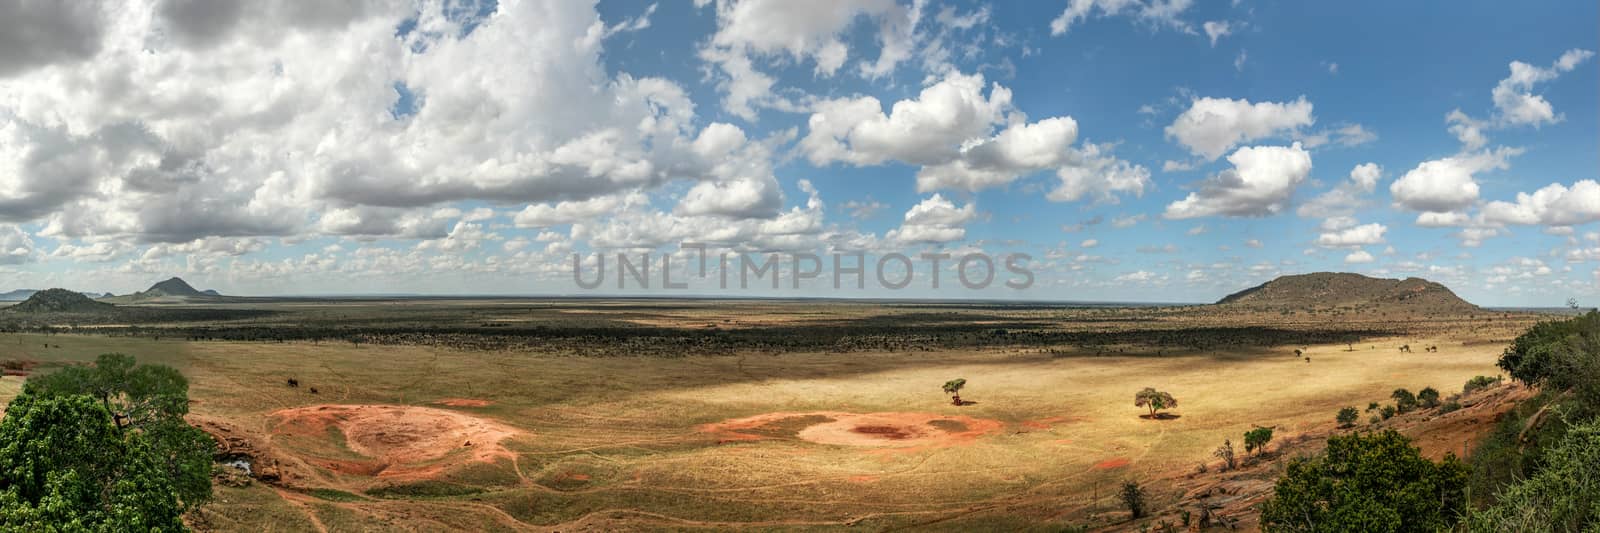 High resolution panorama of flat African savanna with dramatic c by Ivanko